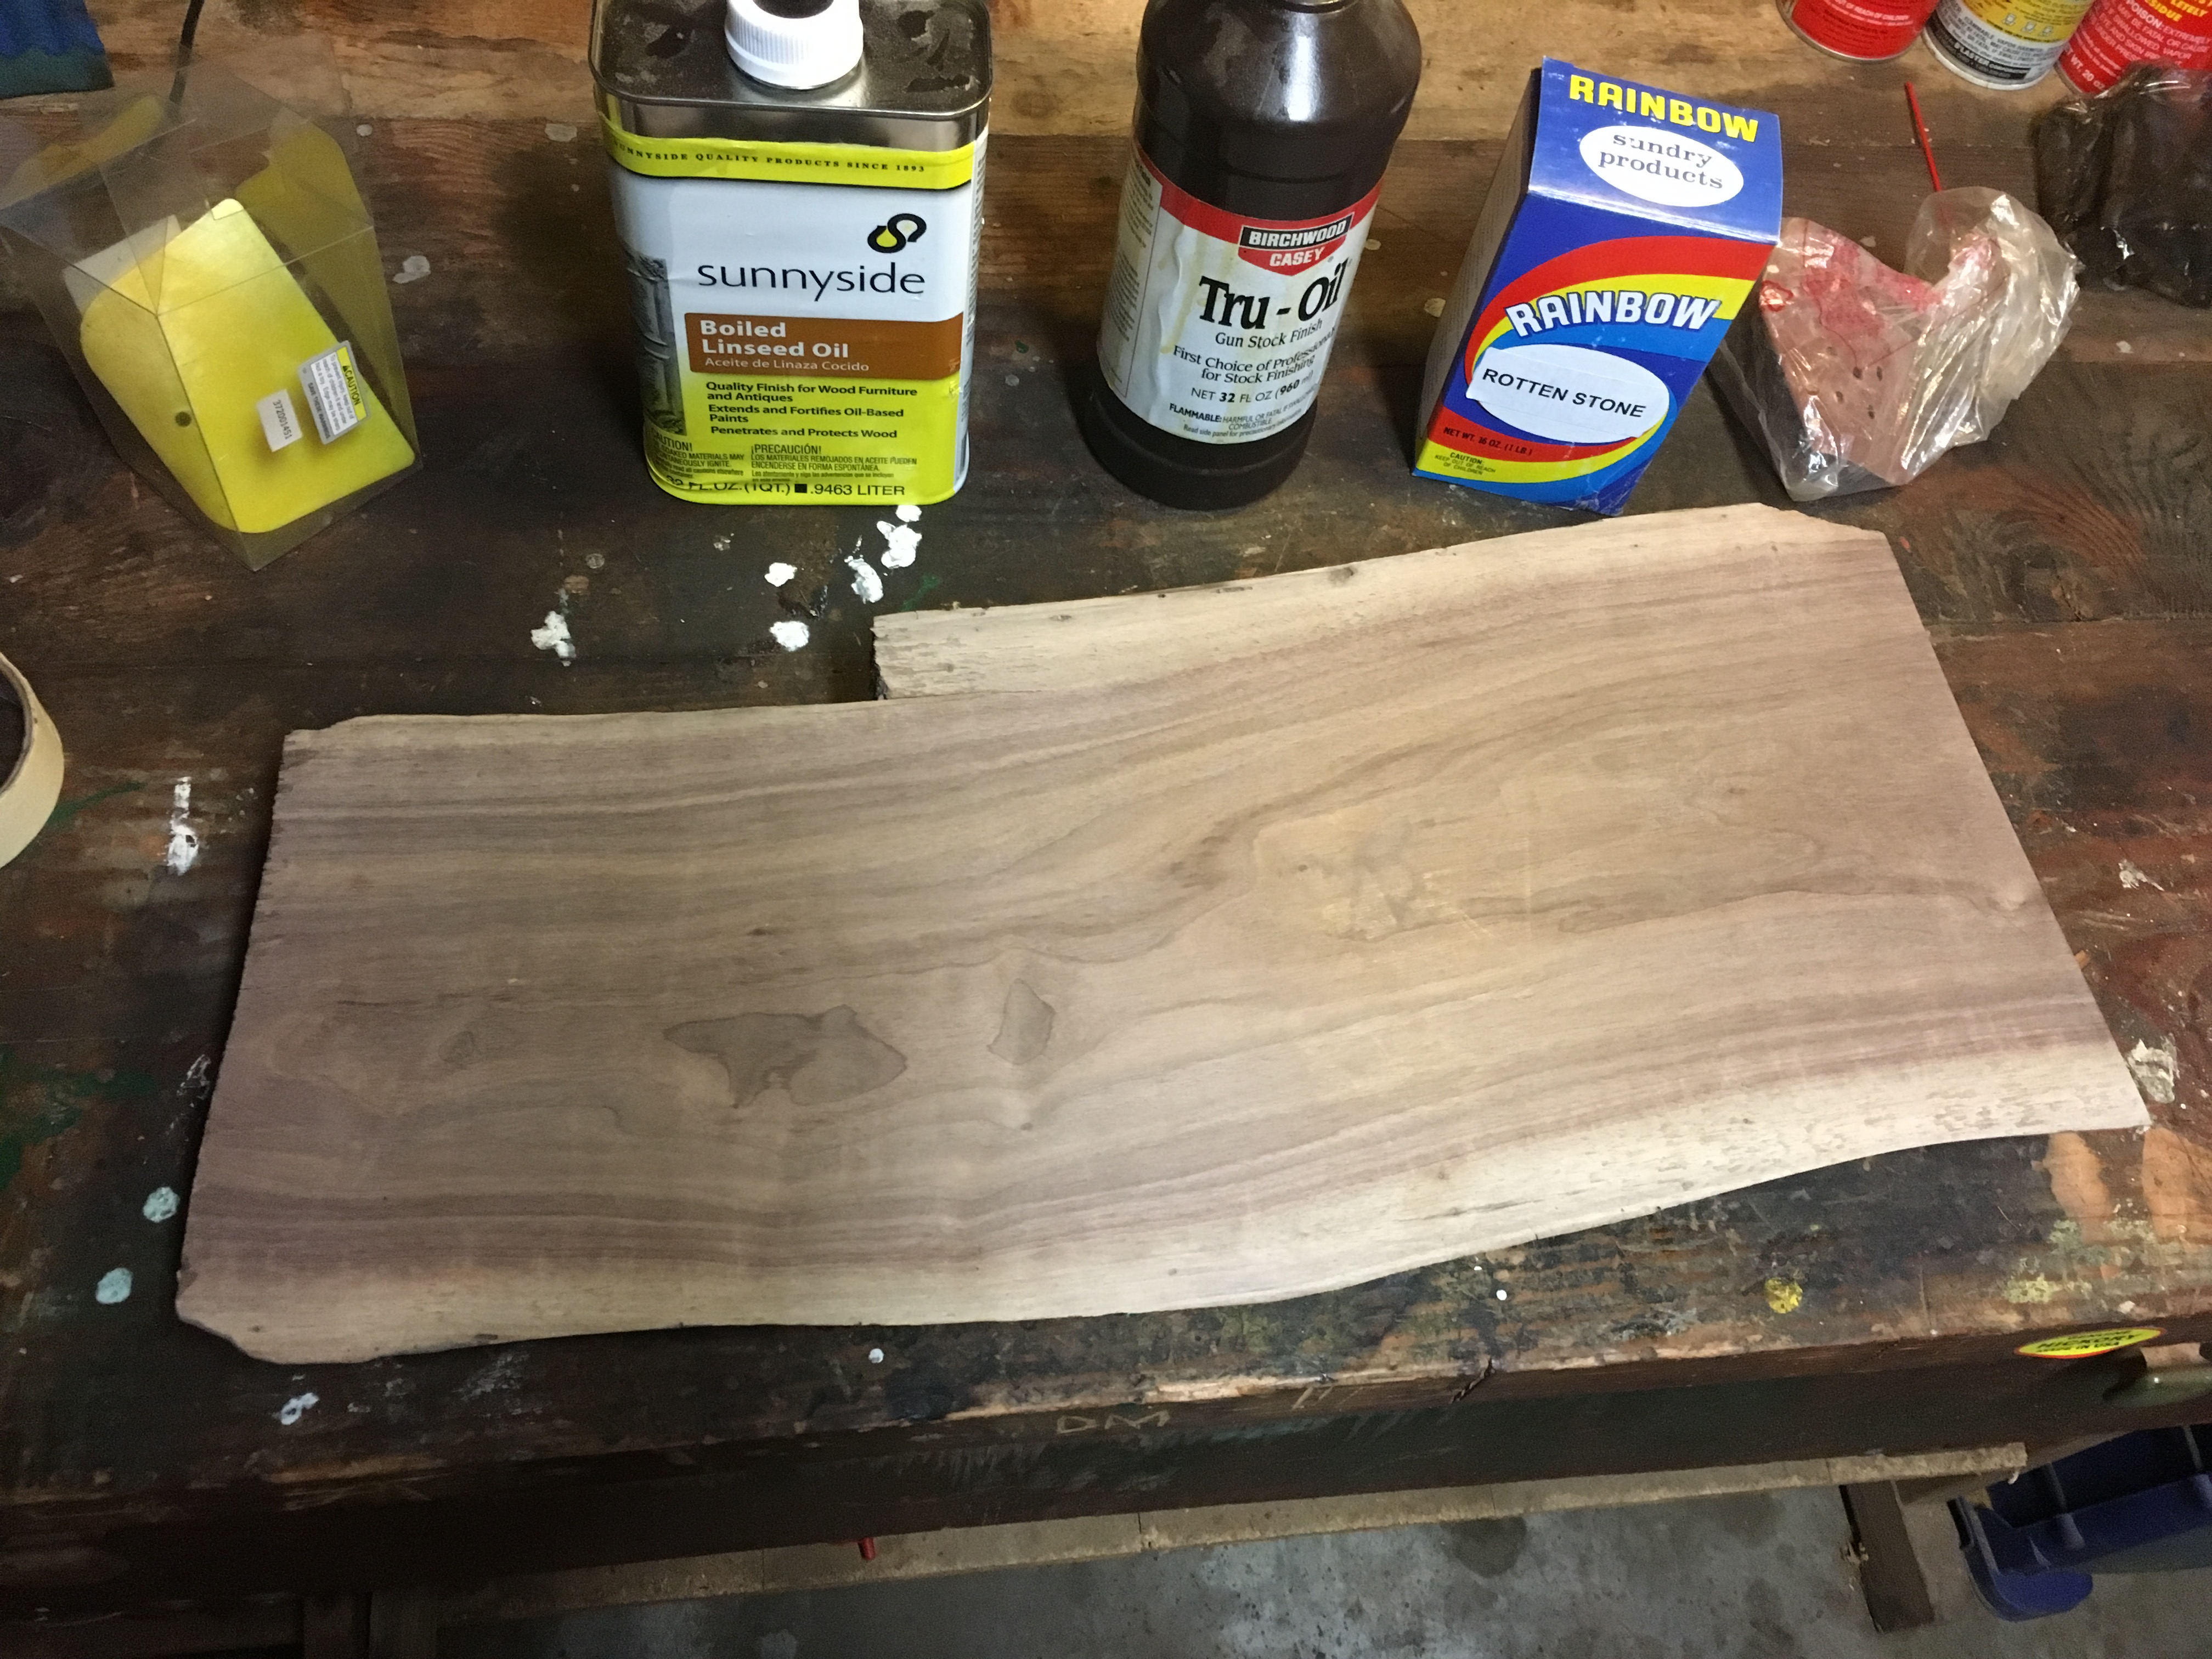 Linseed oil for wooden products